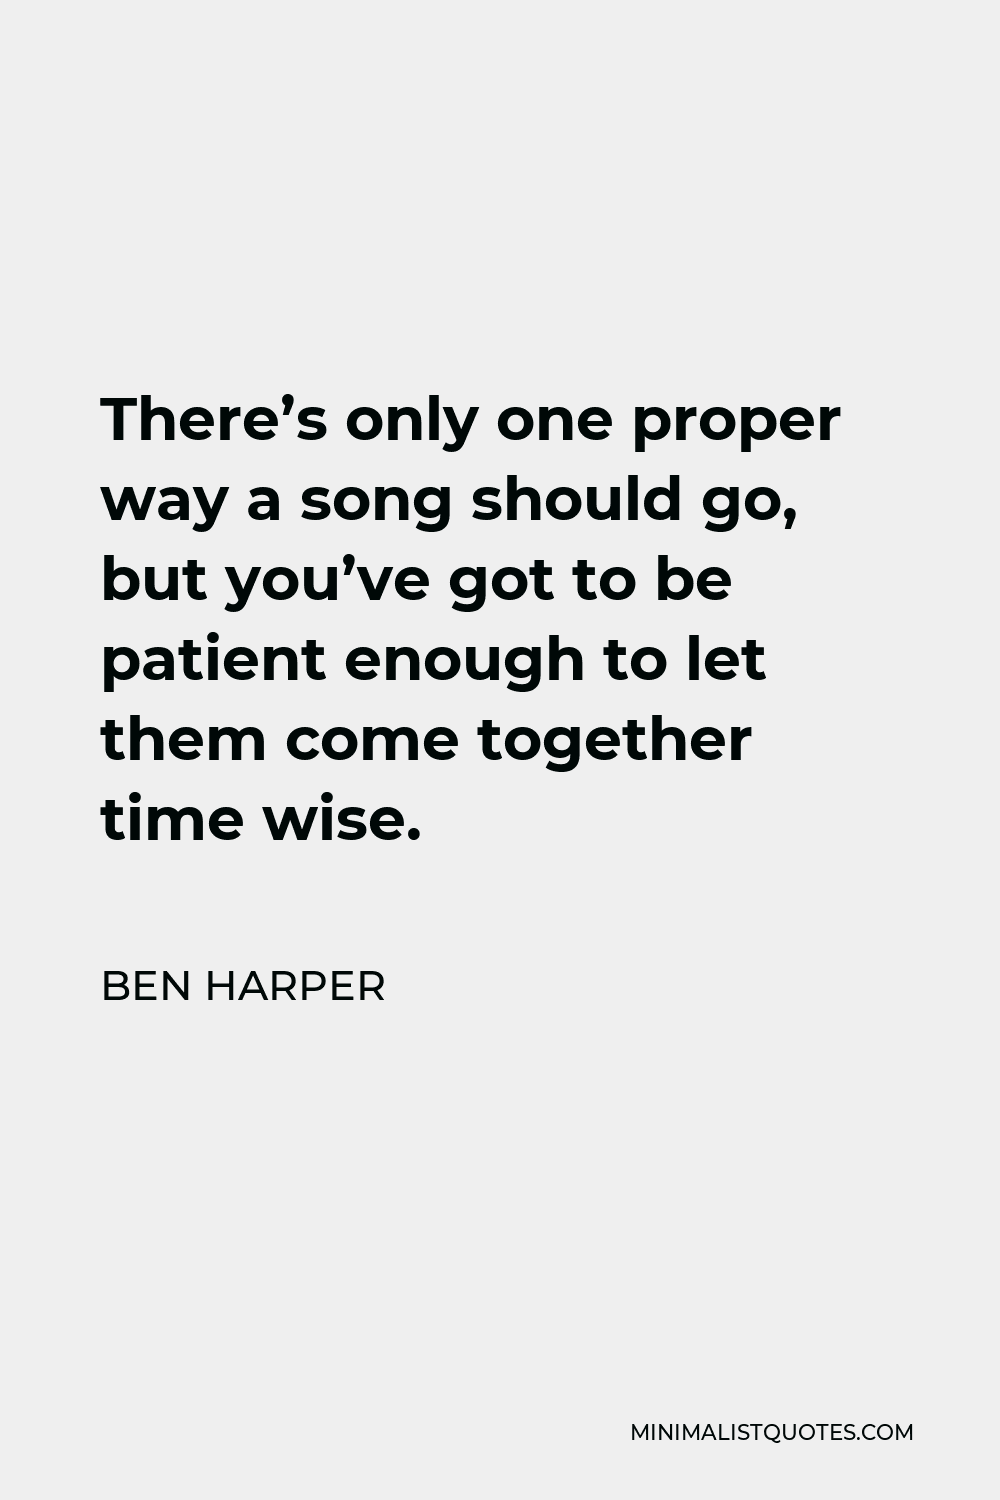 Ben Harper Quote - There’s only one proper way a song should go, but you’ve got to be patient enough to let them come together time wise.